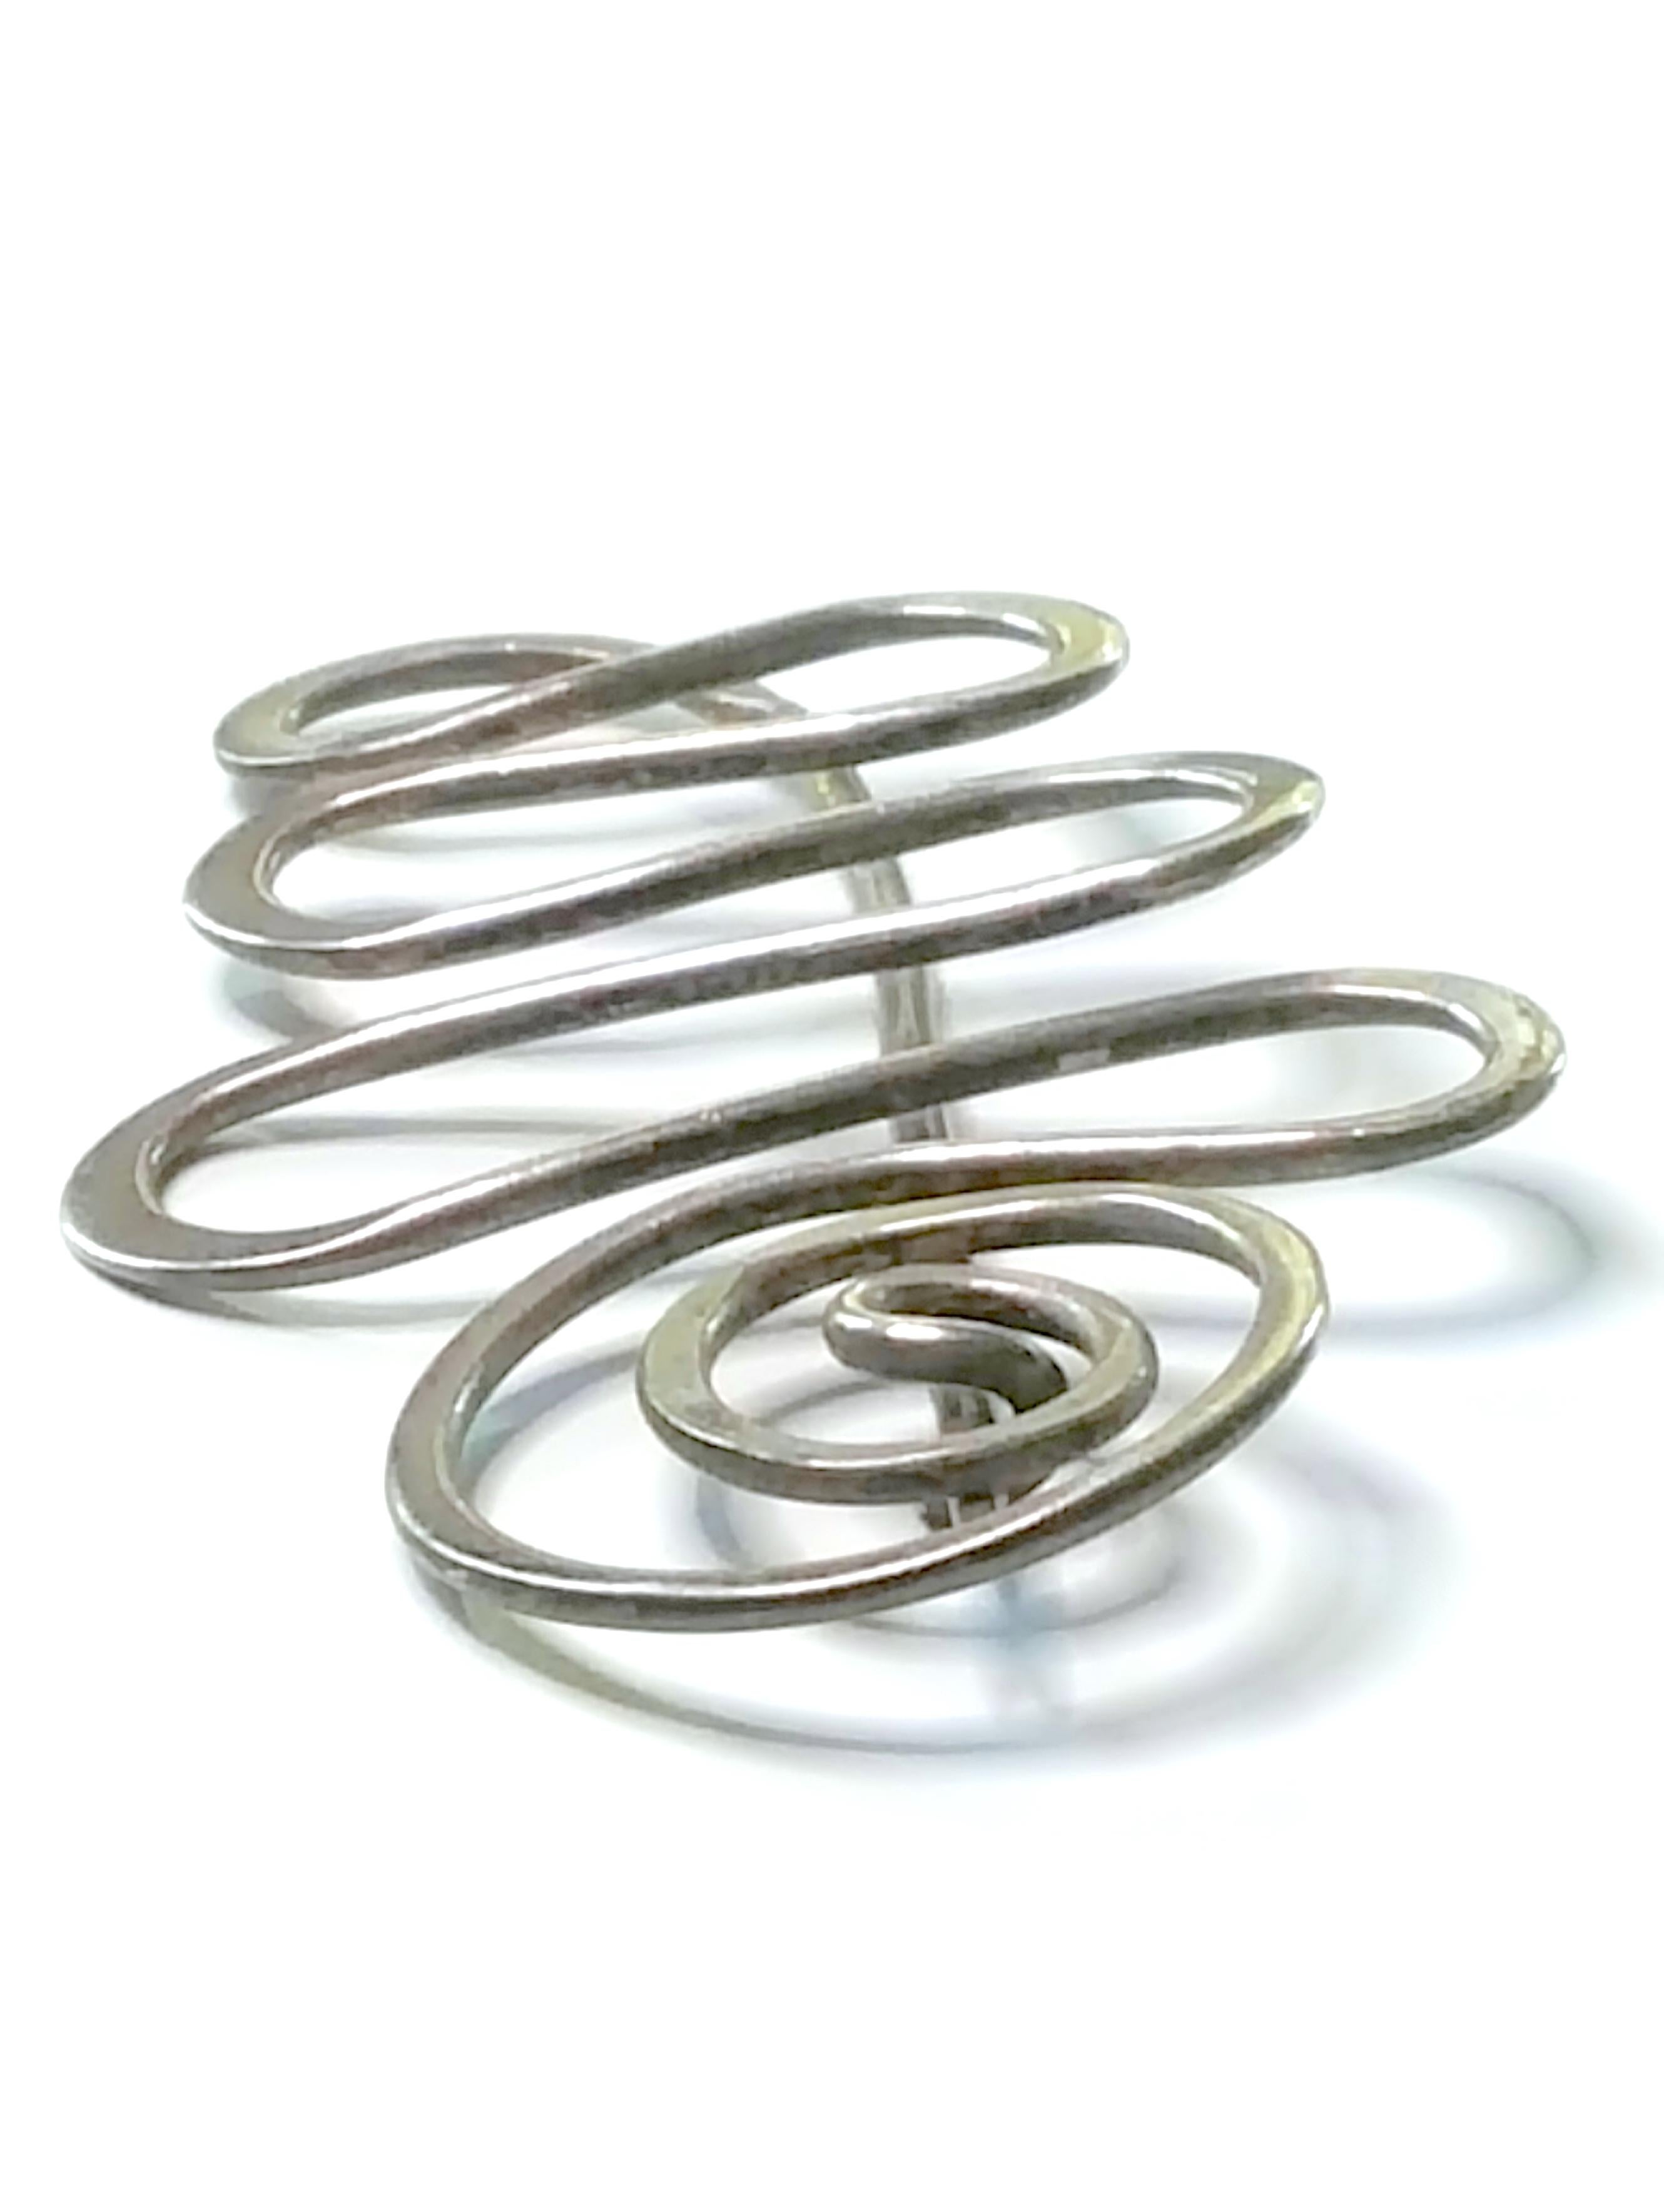 Modern Art MidCentury Hammered Spiral Sterling Silver Wire Undulating Brooch In Excellent Condition For Sale In Chicago, IL